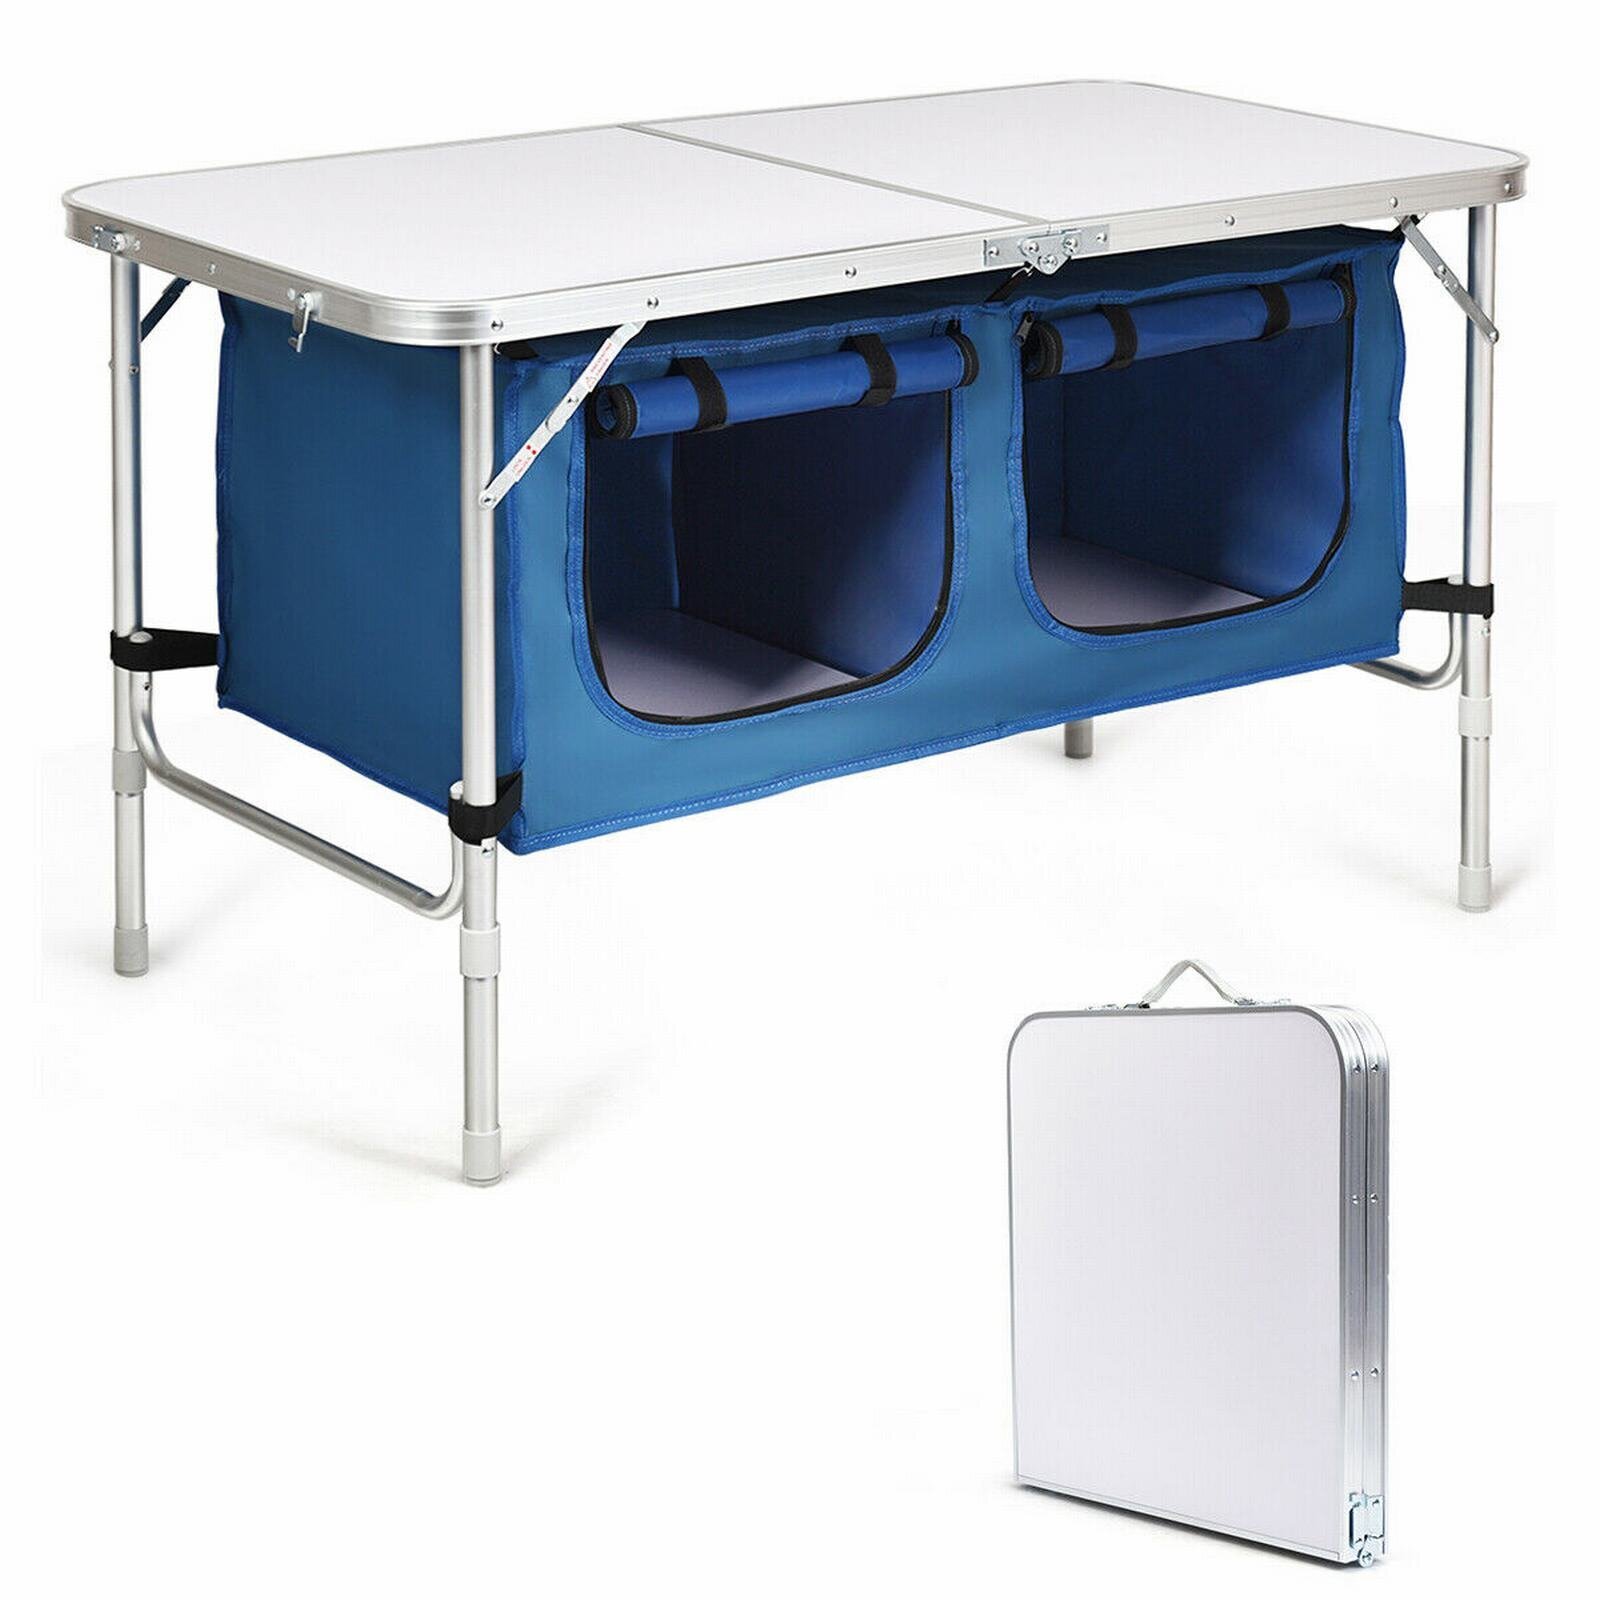 Foldable Camping Table With Storage